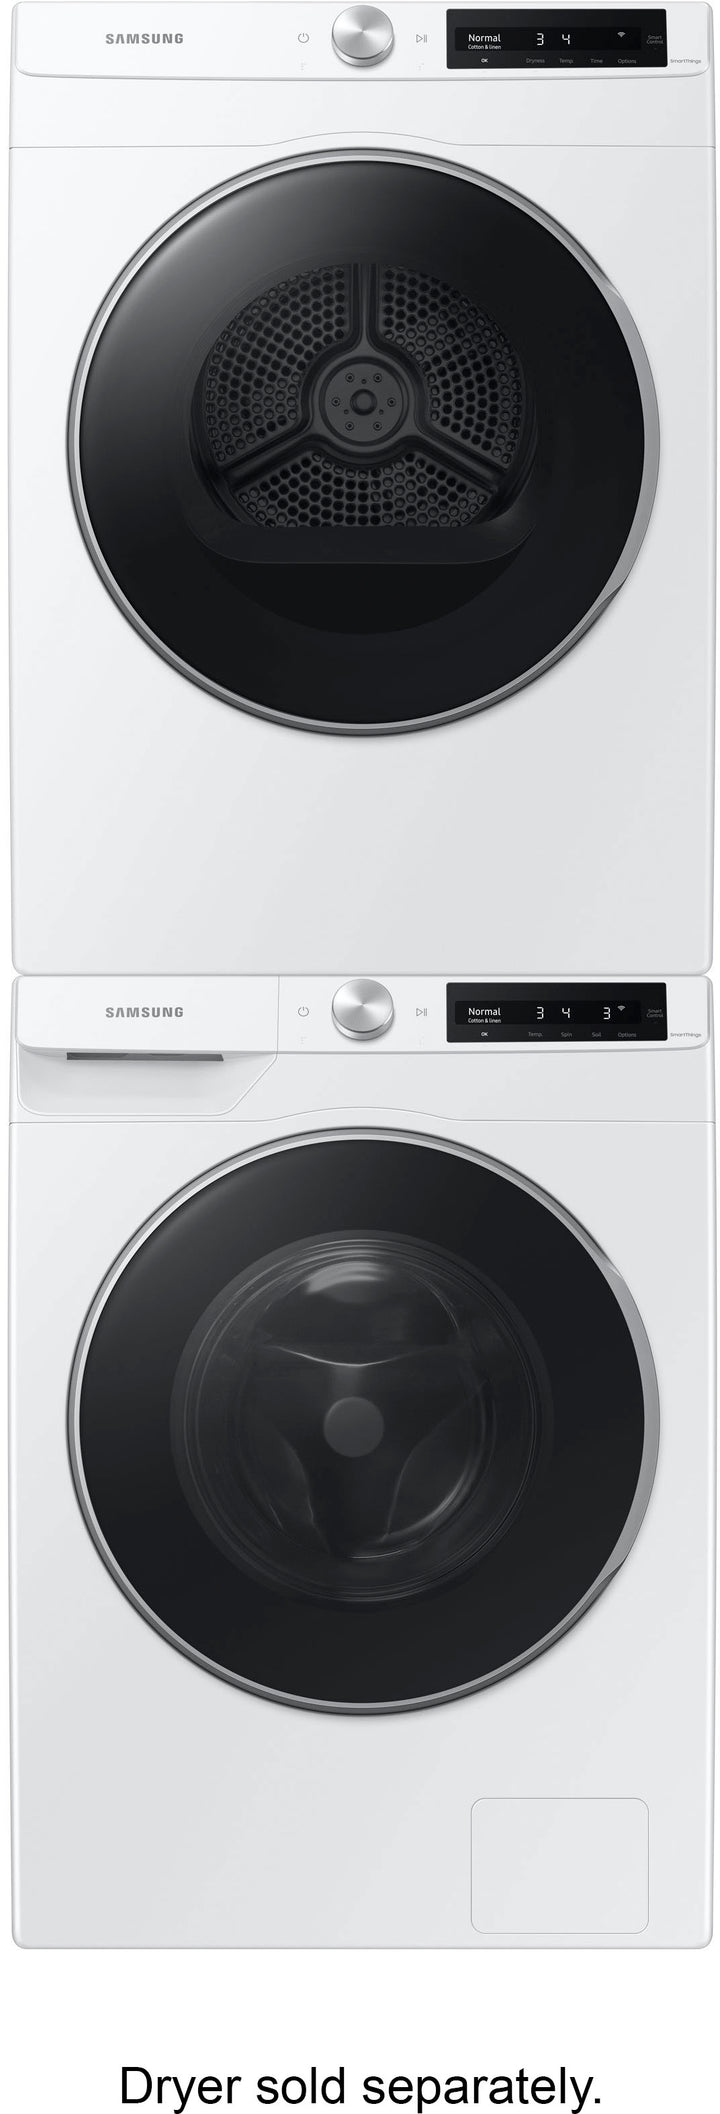 Samsung - 2.5 cu. ft. Compact Front Load Washer with AI Smart Dial and Super Speed Wash - White_3